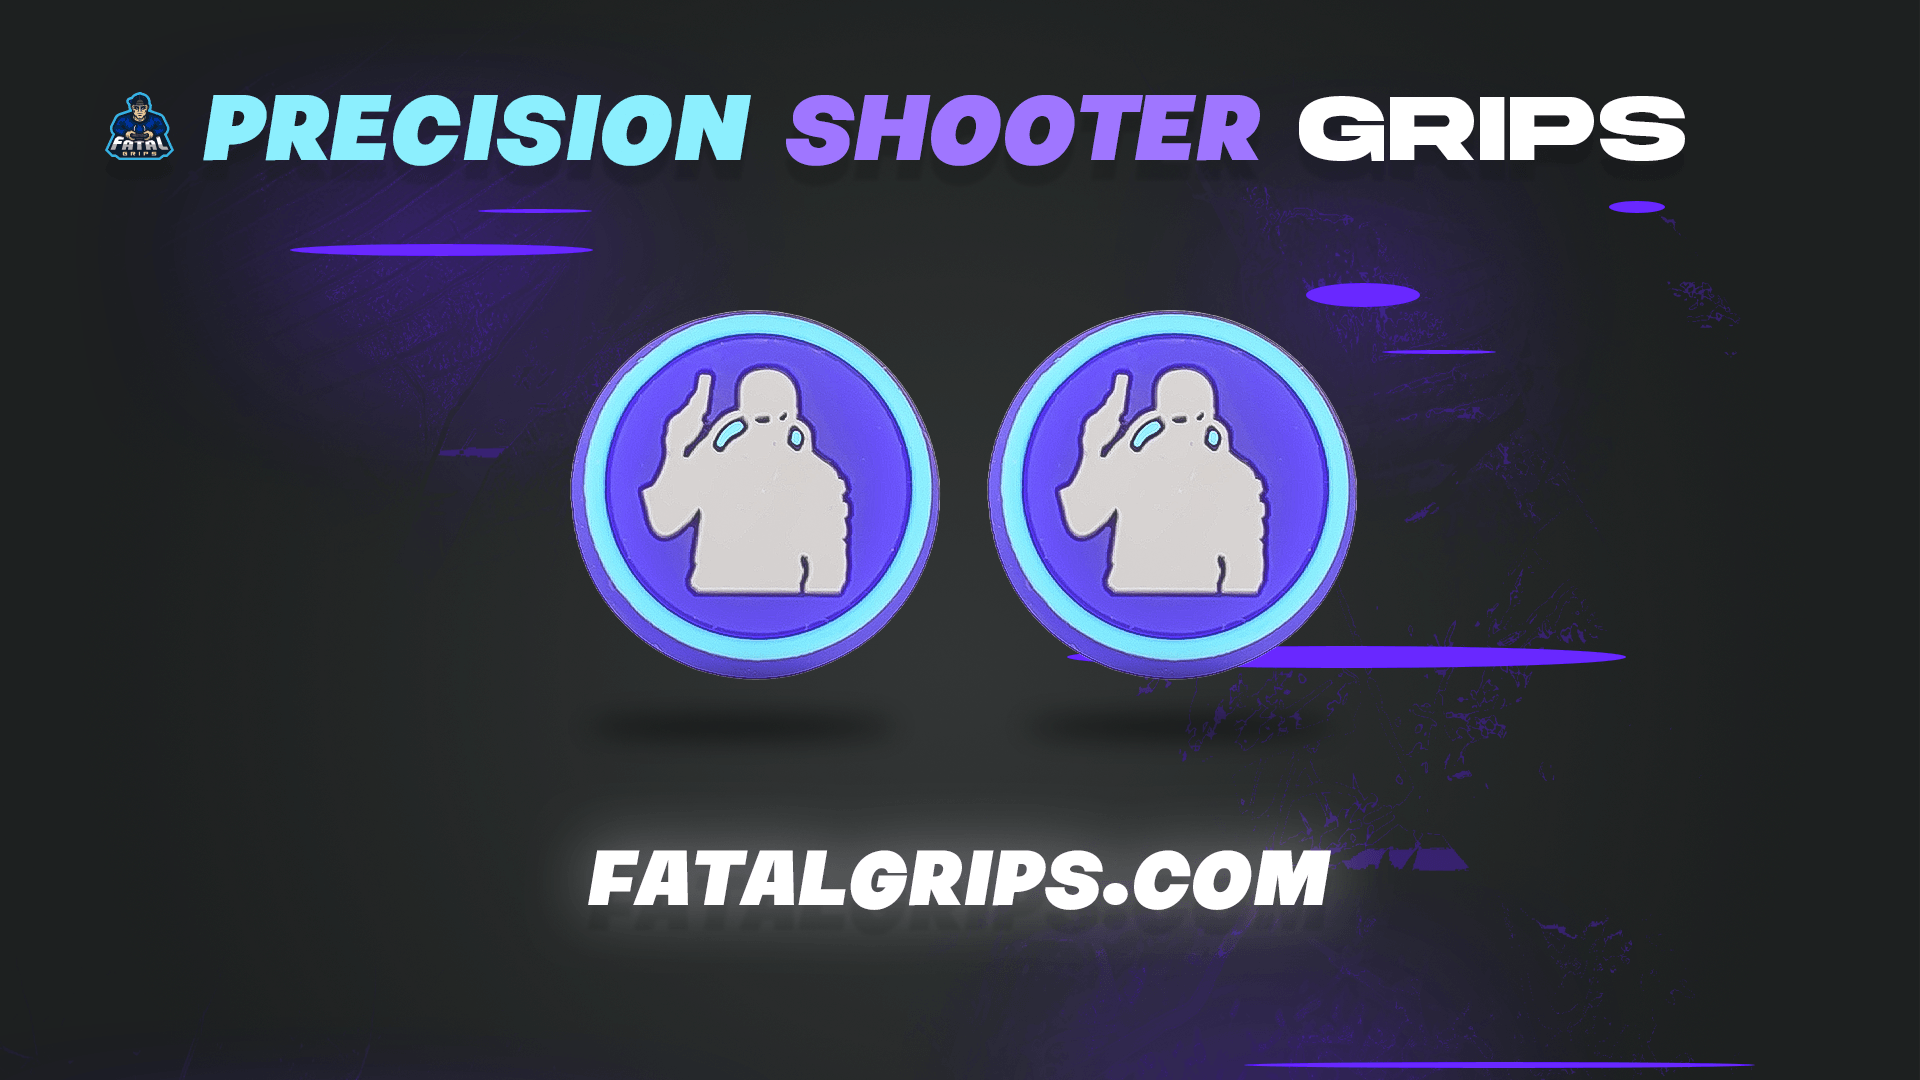 Precision Shooter Grips - Fatal Grips